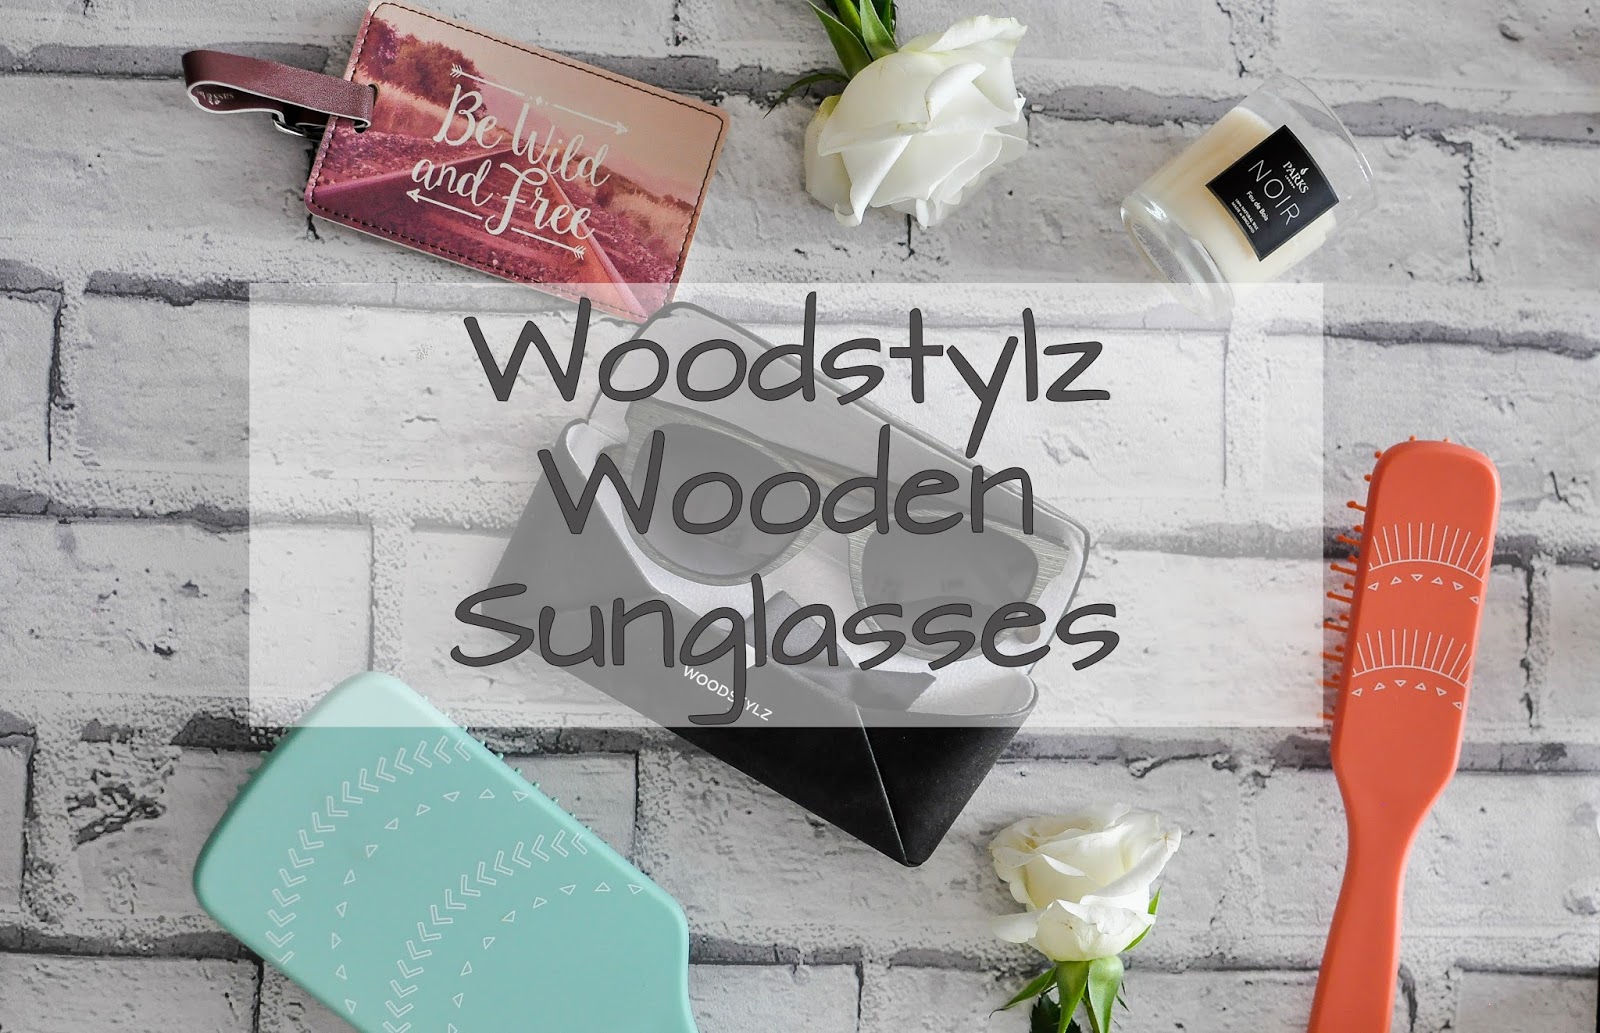 The Must Have Wooden Sunglasses from Woodstylz